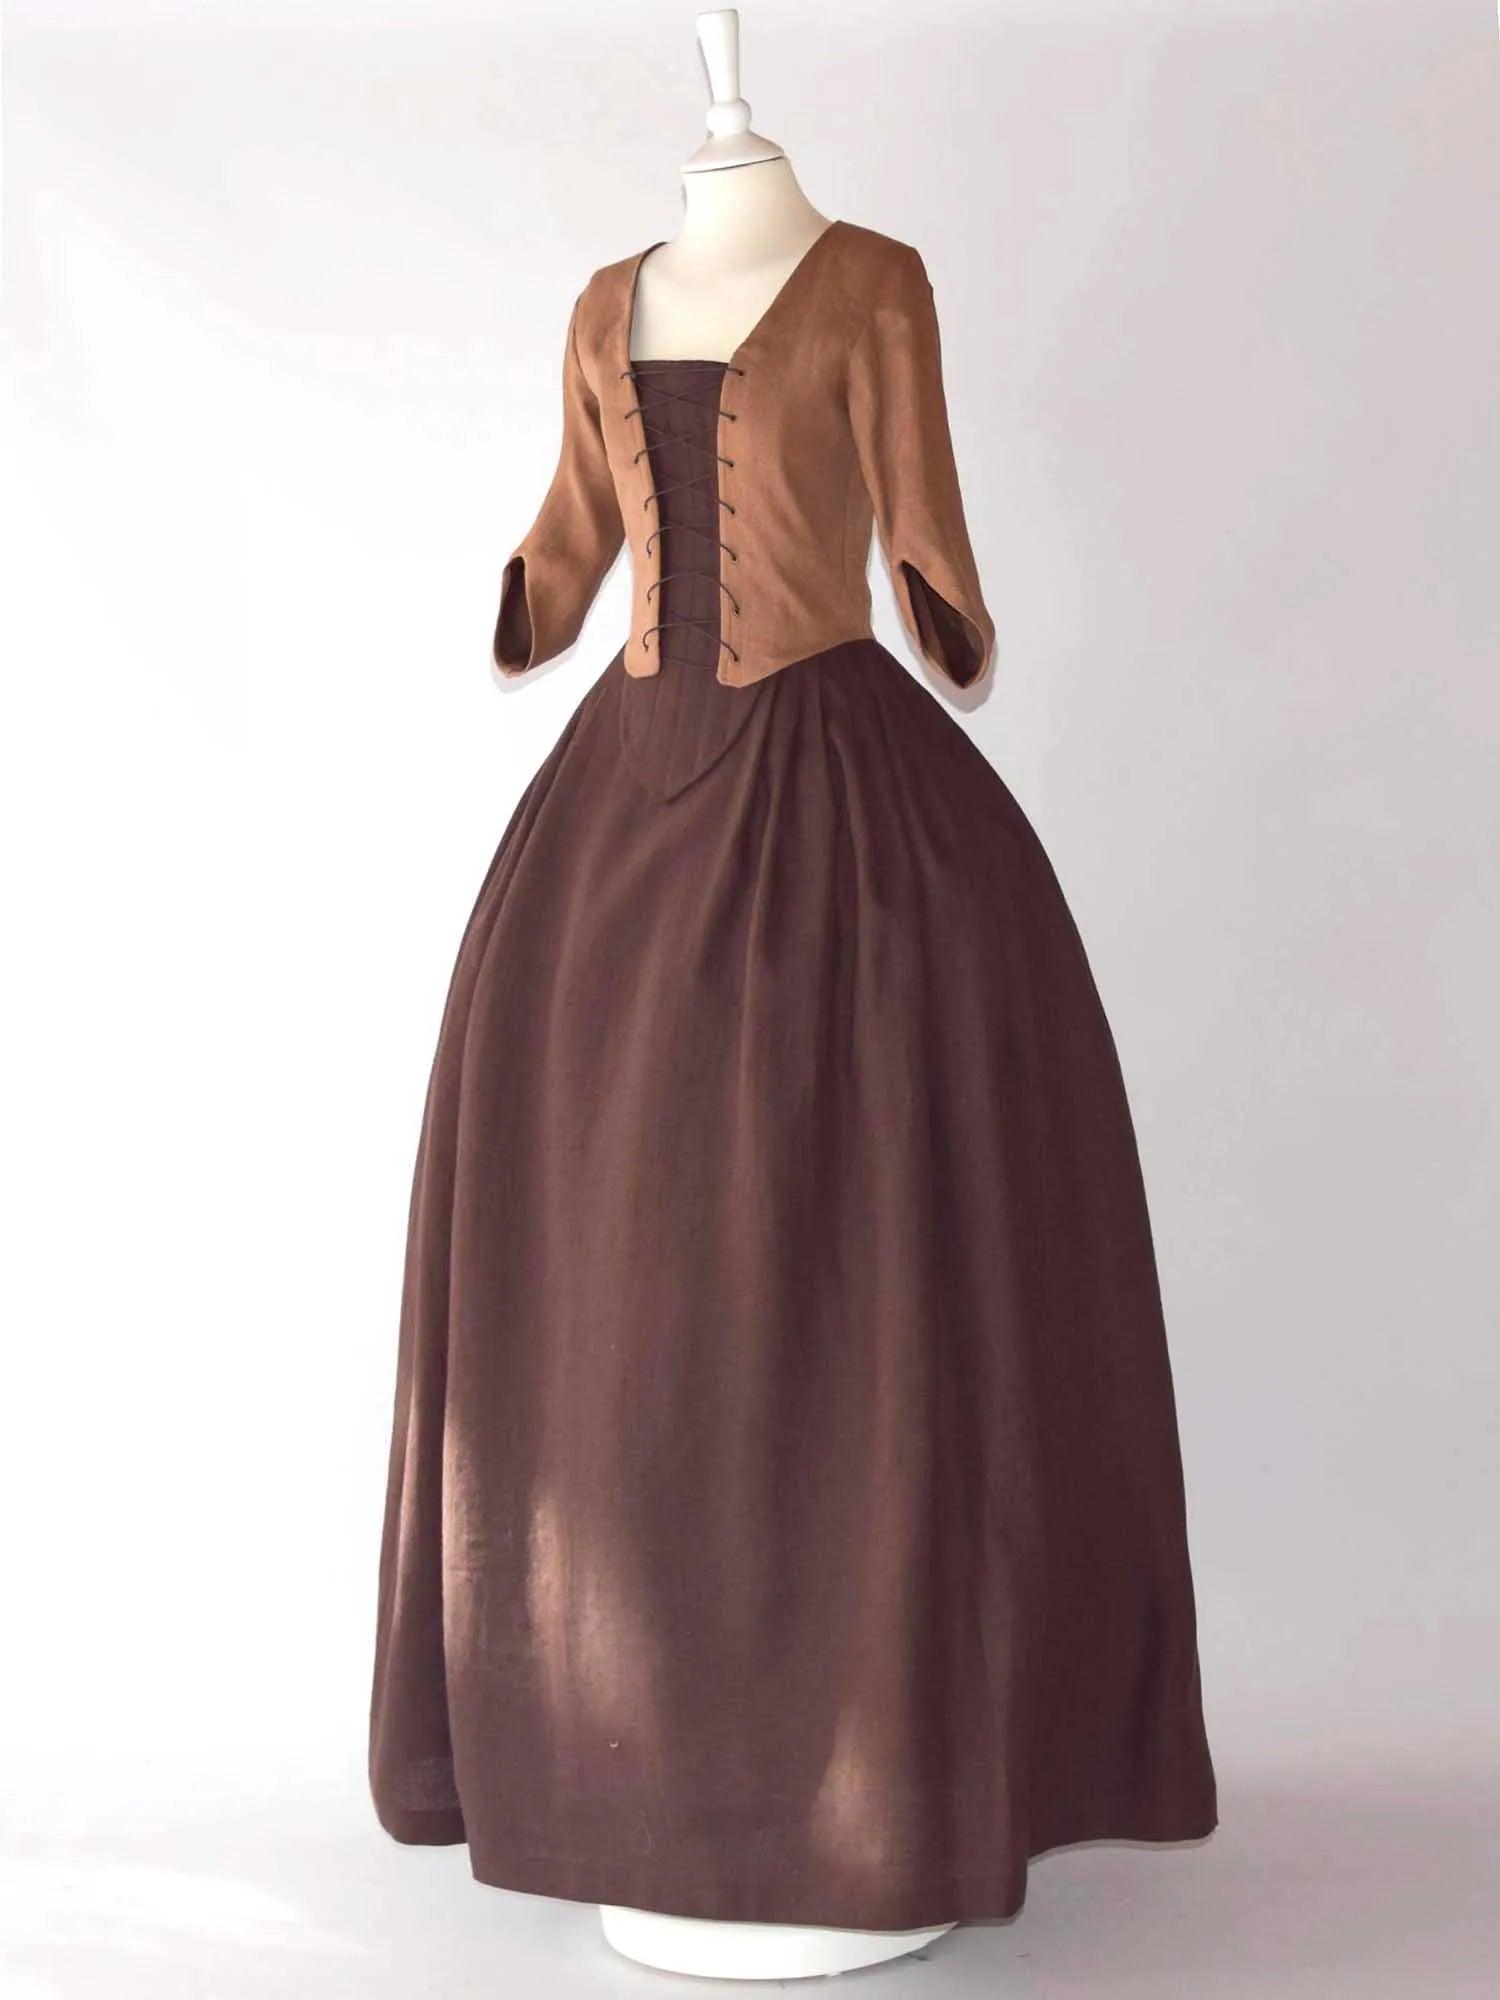 Historical Costume in Toffee & Chocolate Linen - Atelier Serraspina